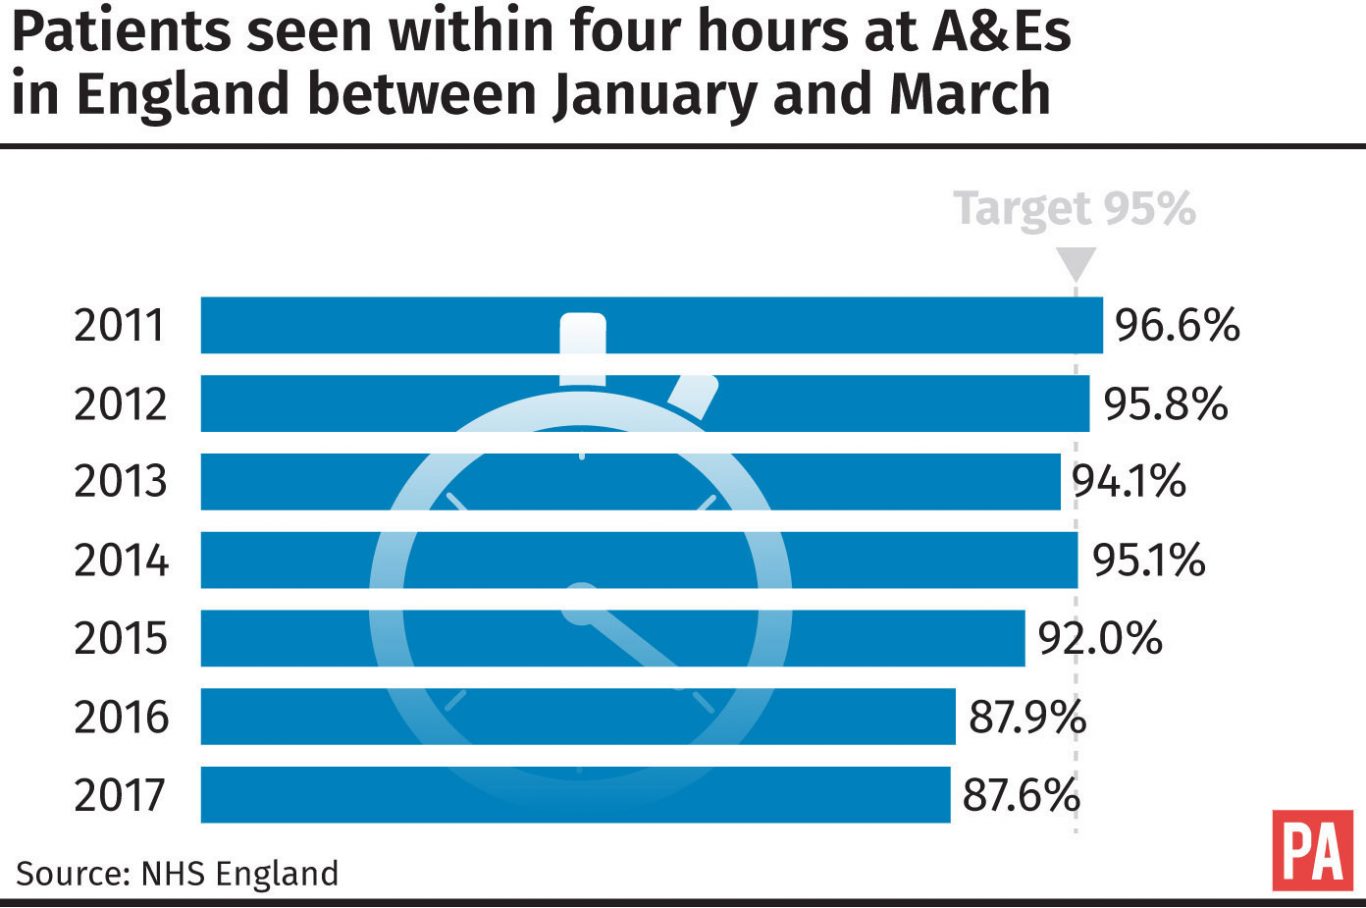 A&E patients seen within four hours in England between January and March